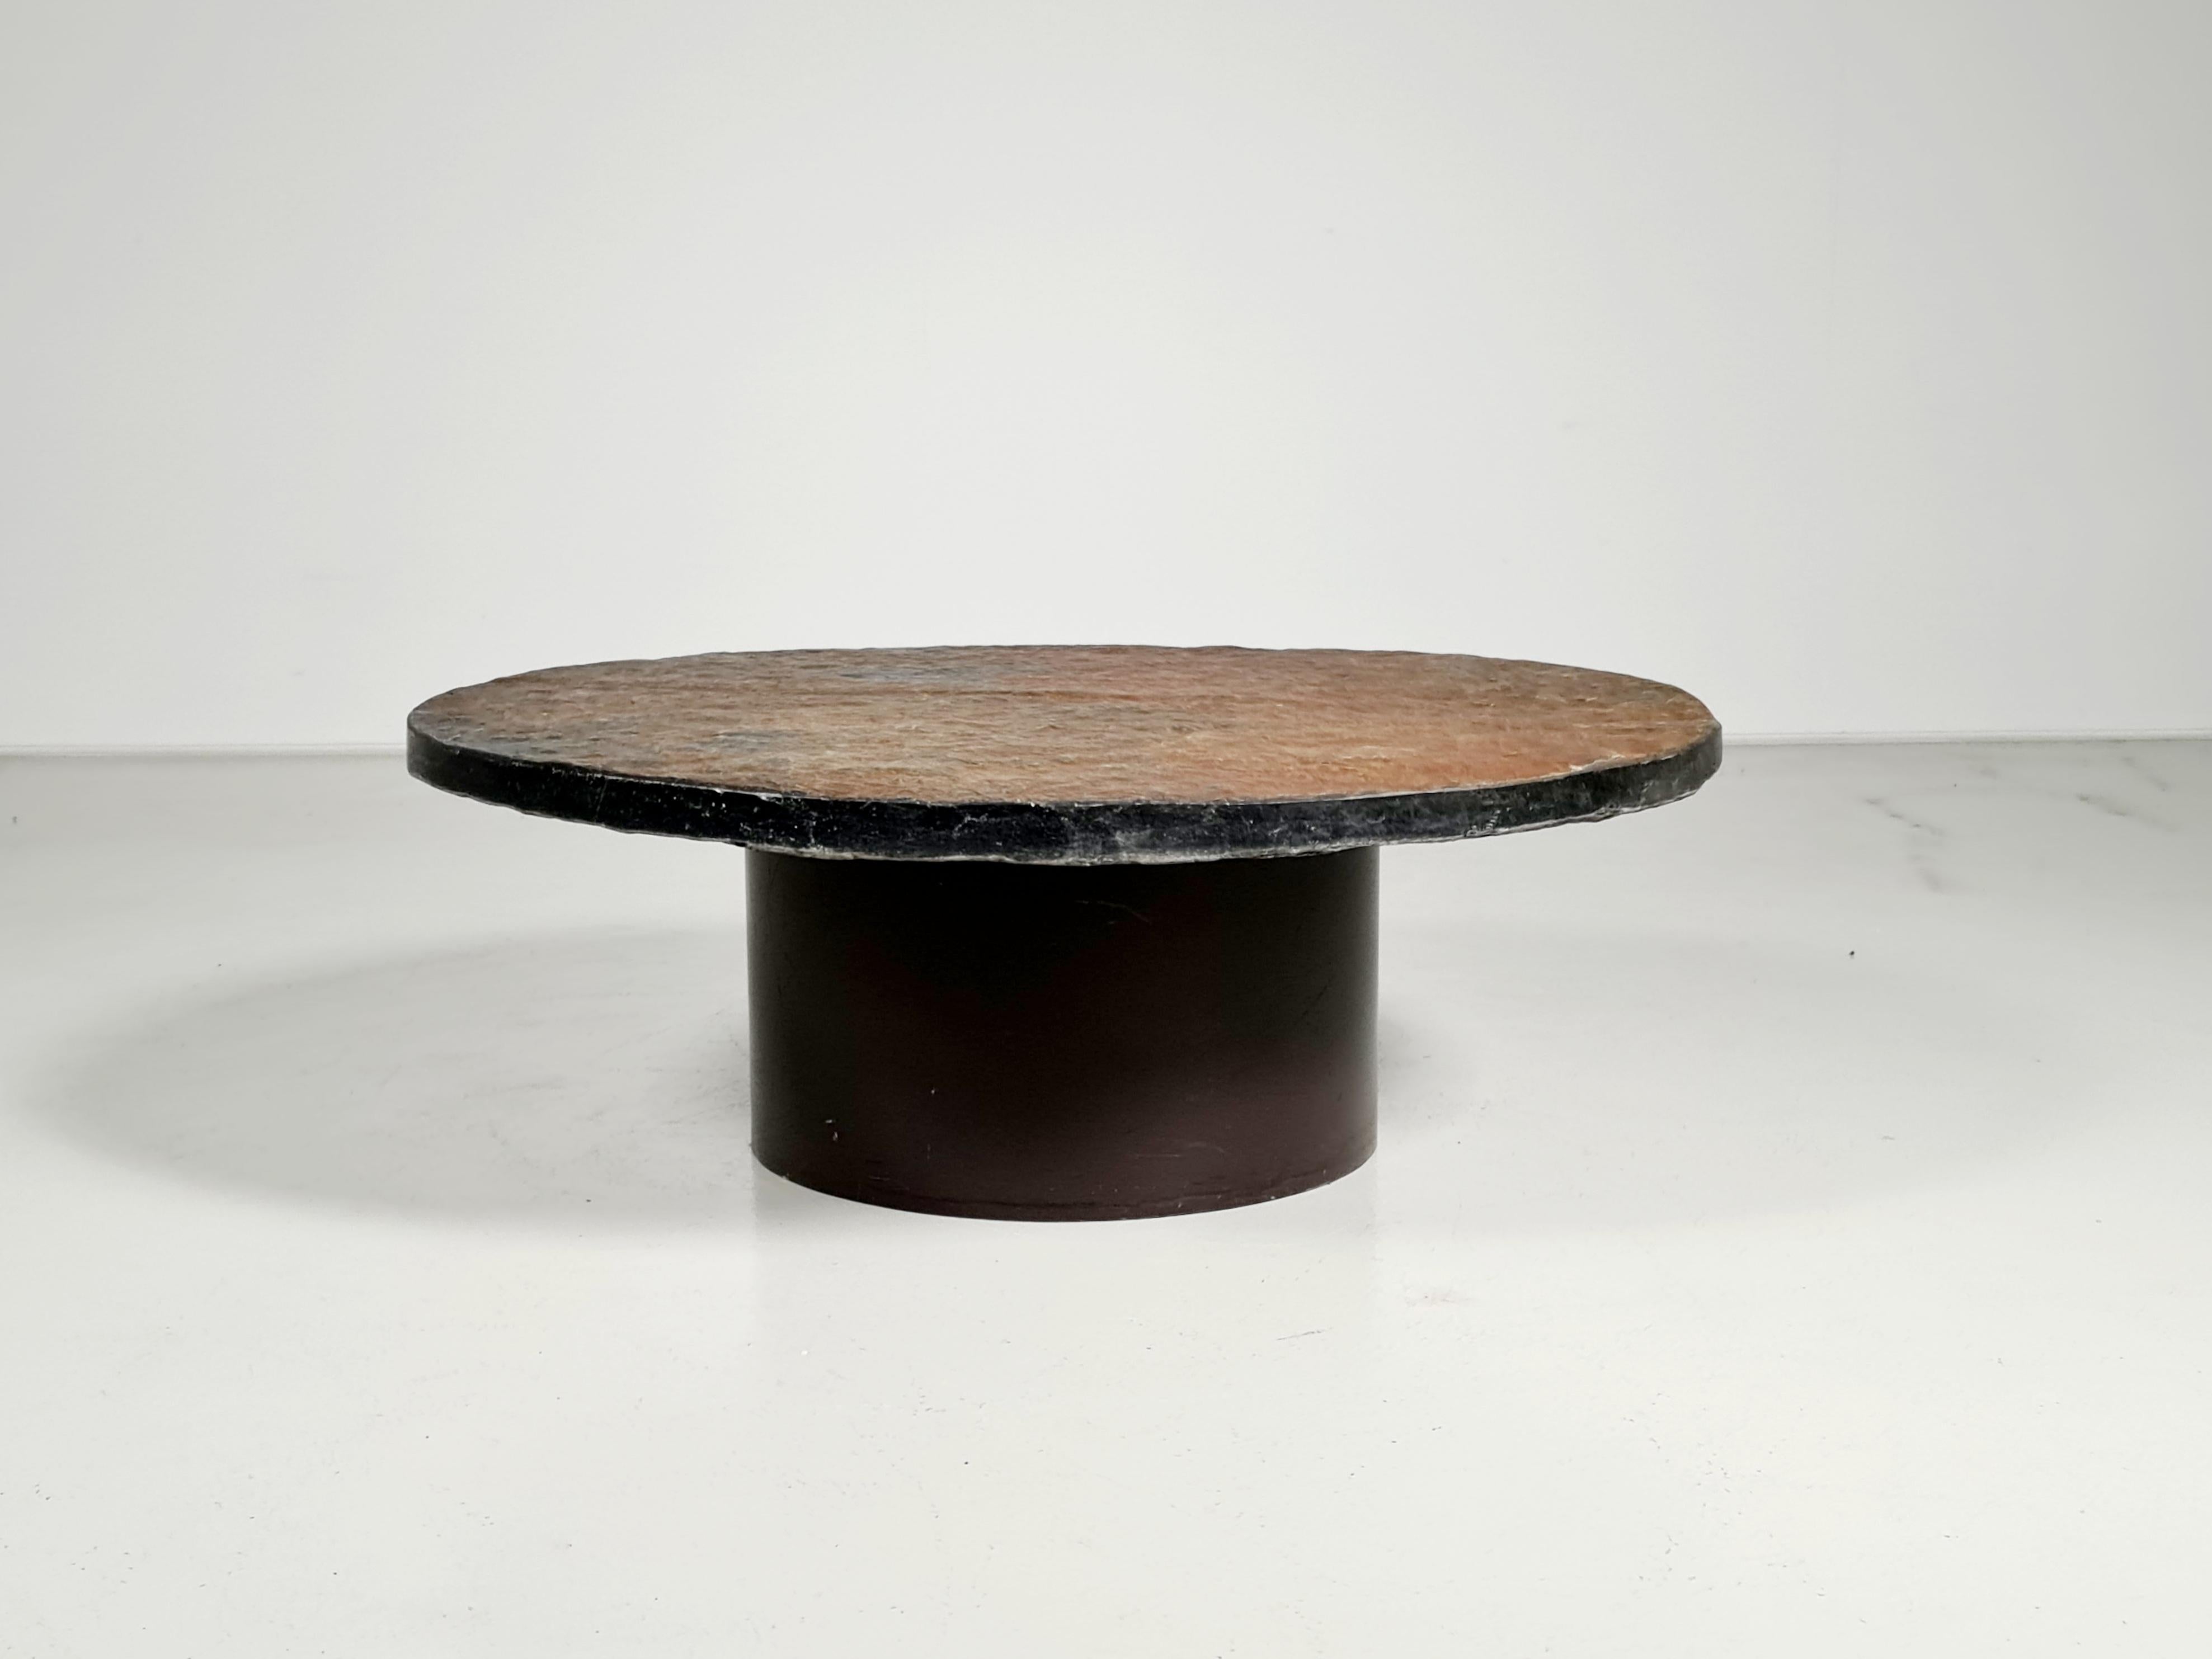 Brutalist slate stone coffee table, Netherlands, 1970
The table has a natural slate top with a beautiful brown/rusty color.

The heavy base is made from lacquered metal and has three adjustable feet.
The robustness of the natural materials